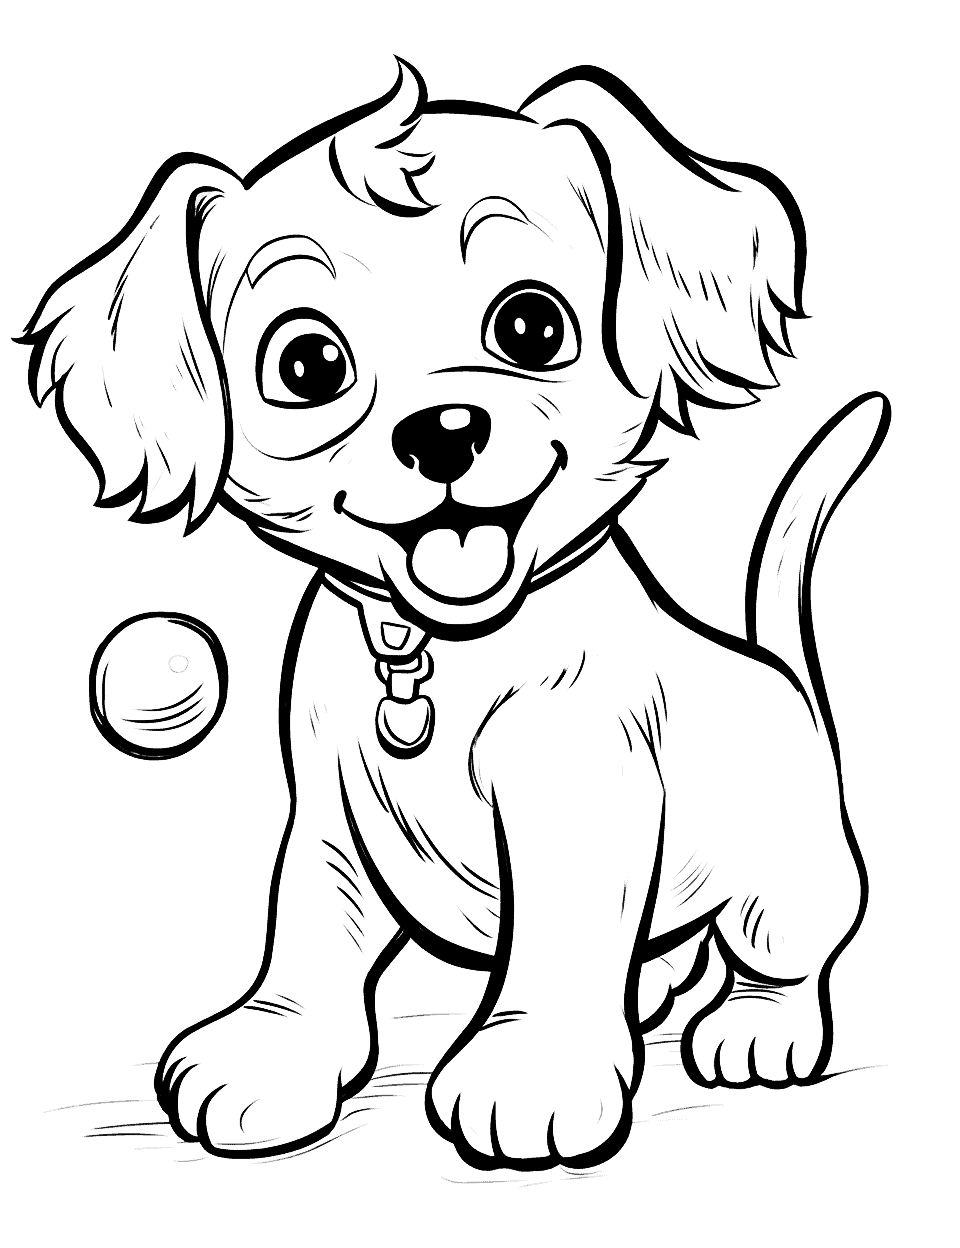 Puppy Playing With a Ball Cute Coloring Page - A playful cute puppy chasing and catching a ball.